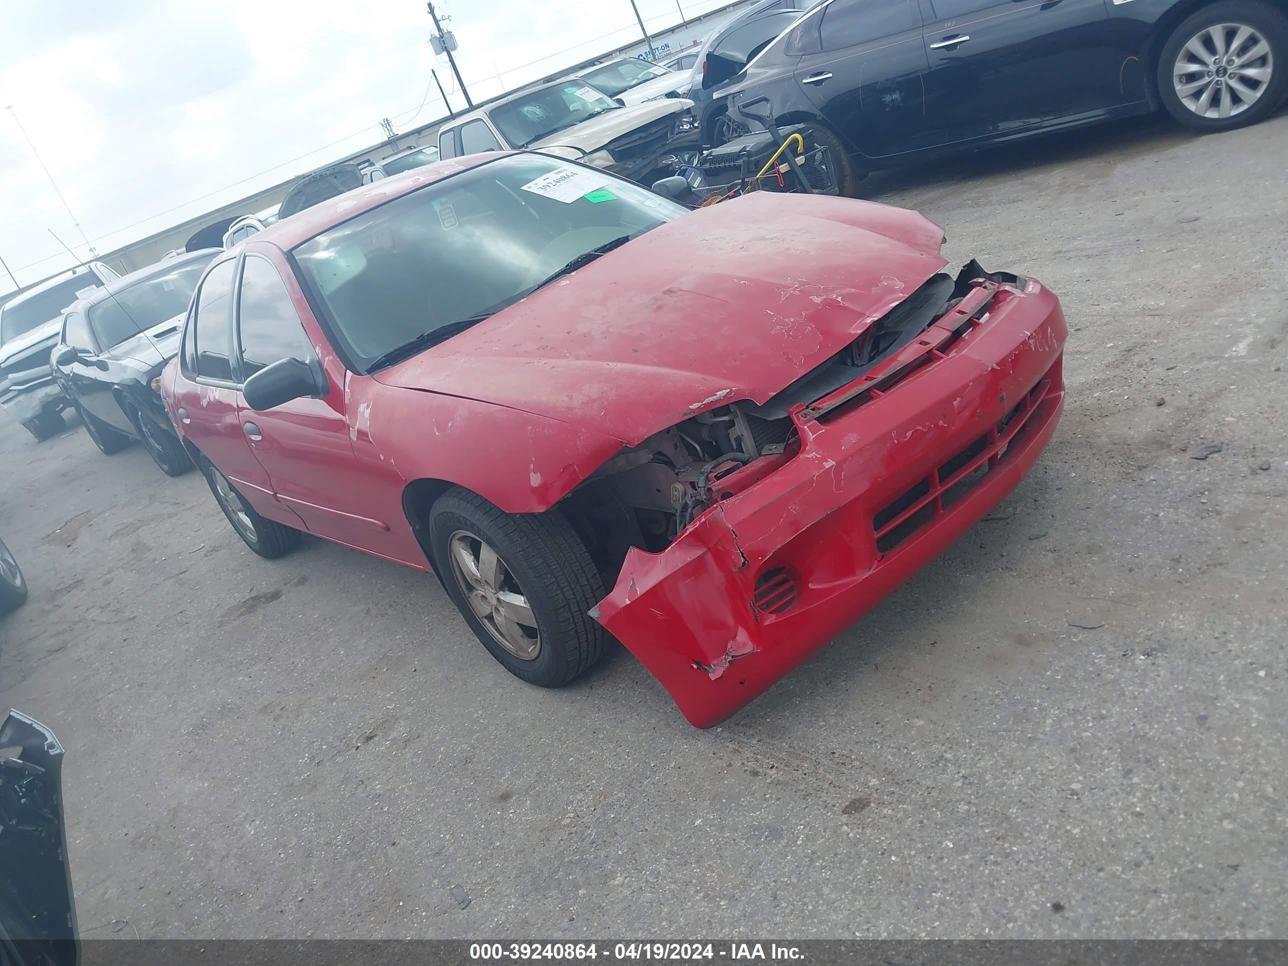 vin: 1G1JF52F147263377 1G1JF52F147263377 2004 chevrolet cavalier 2200 for Sale in 77038, 2535 West Mt. Houston Road, Houston, Texas, USA